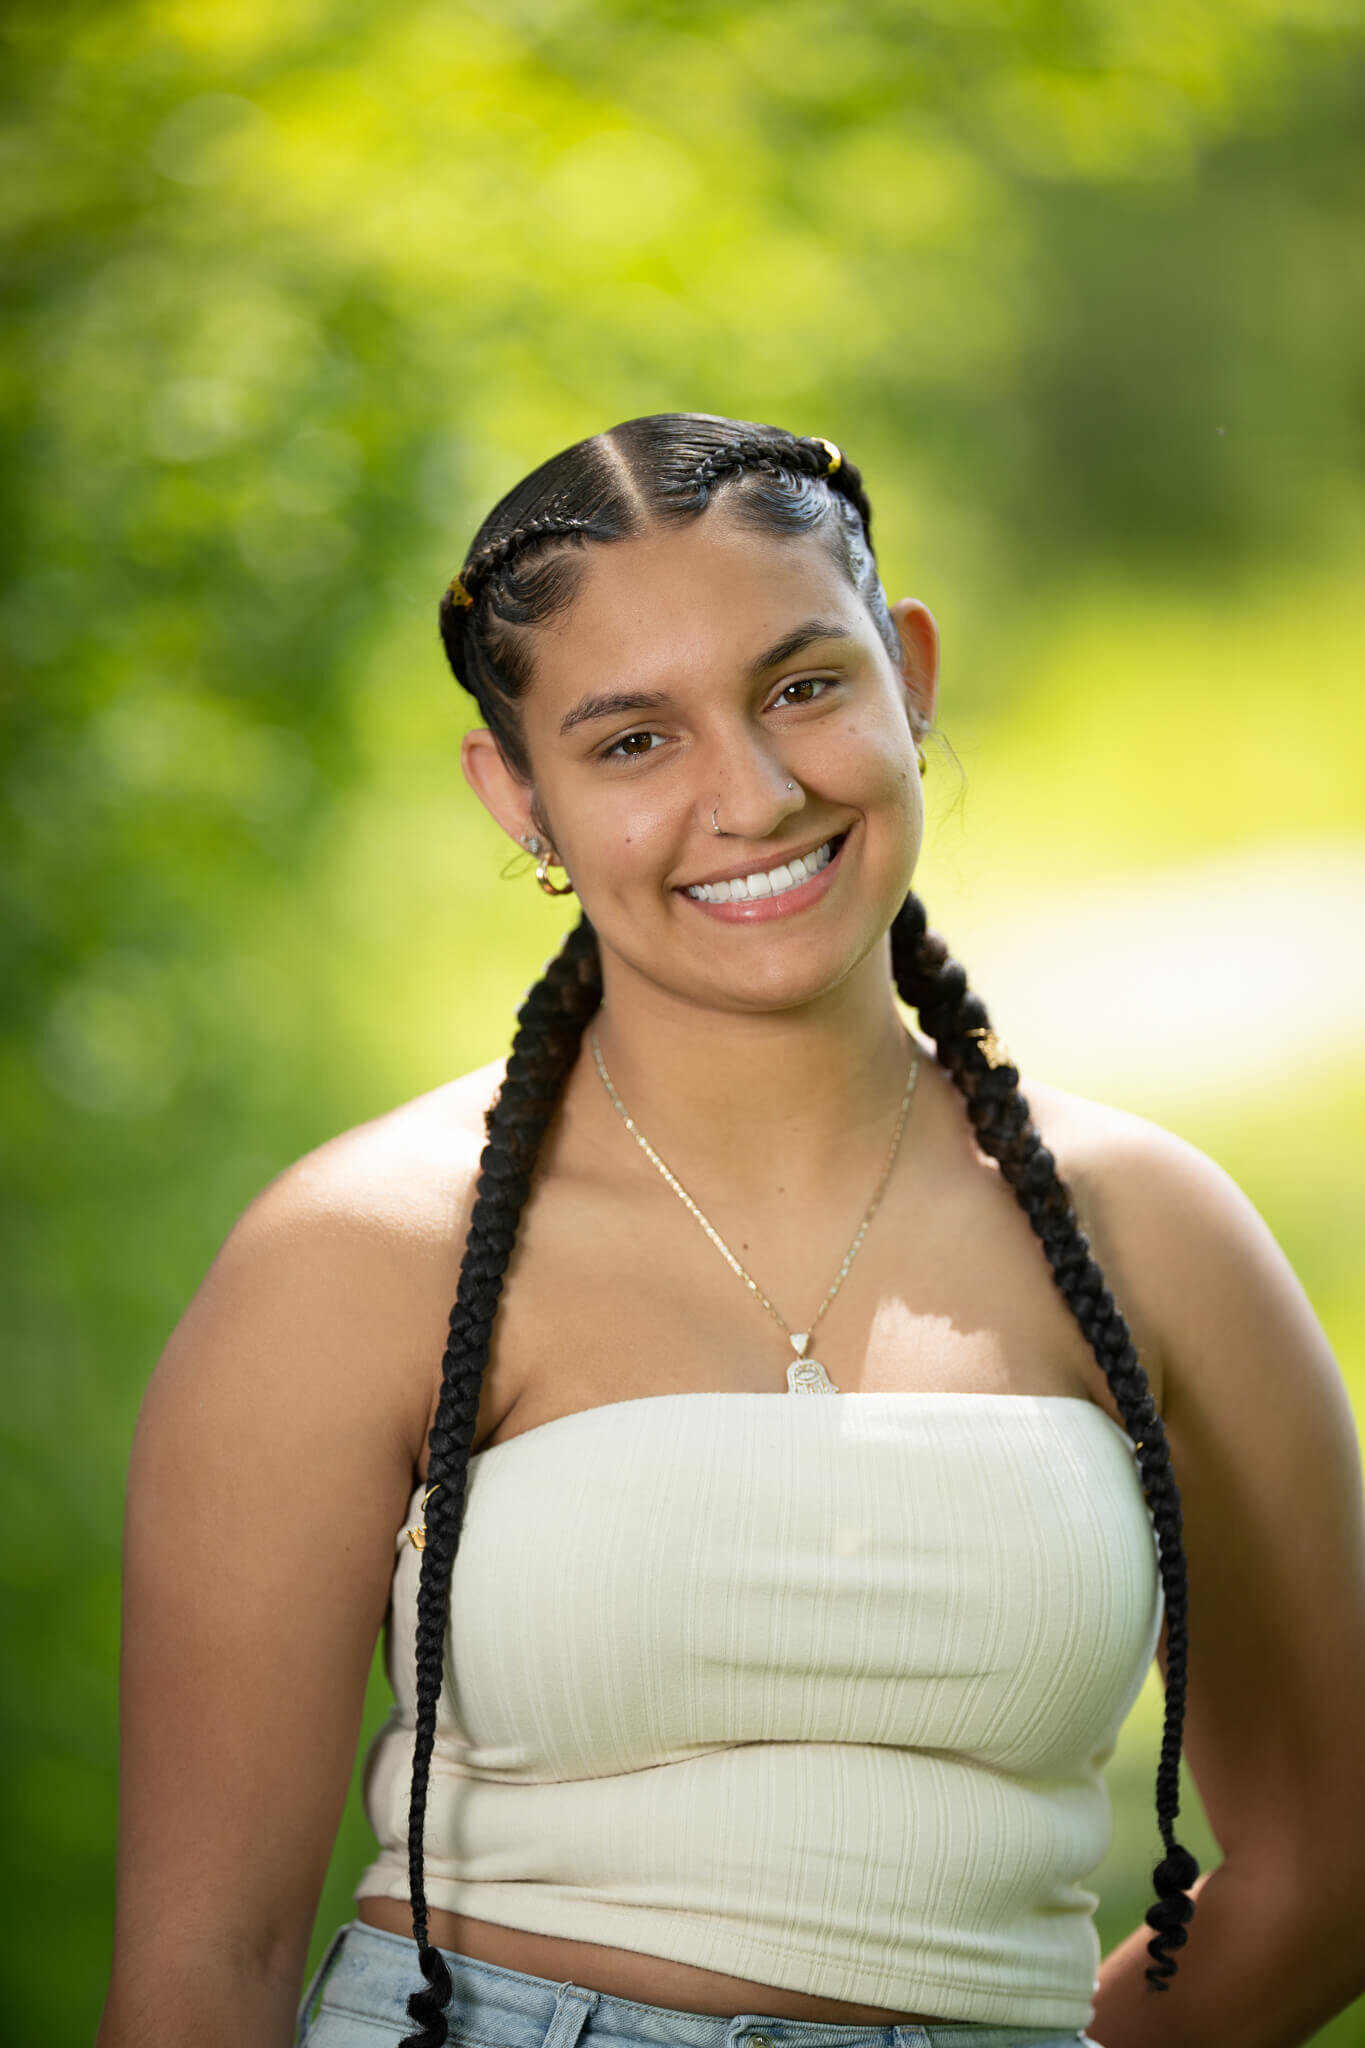 High school senior portrait photography in Clinton MA  of female in a white top smiling at the camera with a green and yellow background stqandign with one hand behind her back